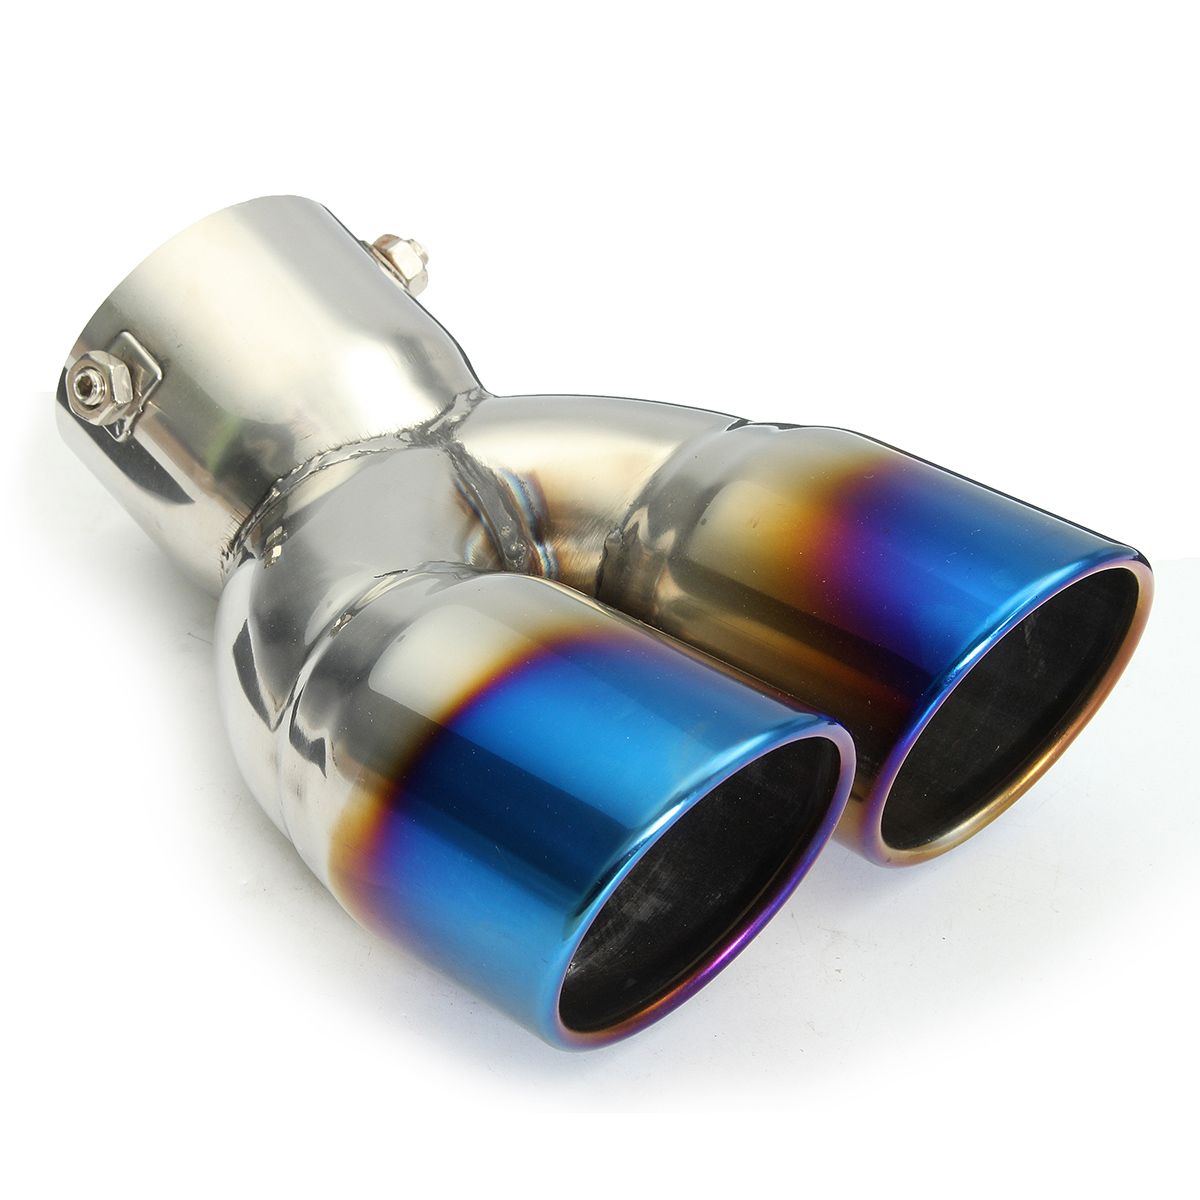 Universal-Bluing-Exhaust-Muffler-Silencer-Dual-Tail-Pipe-Tips-58-70mm-Inlet-1409592